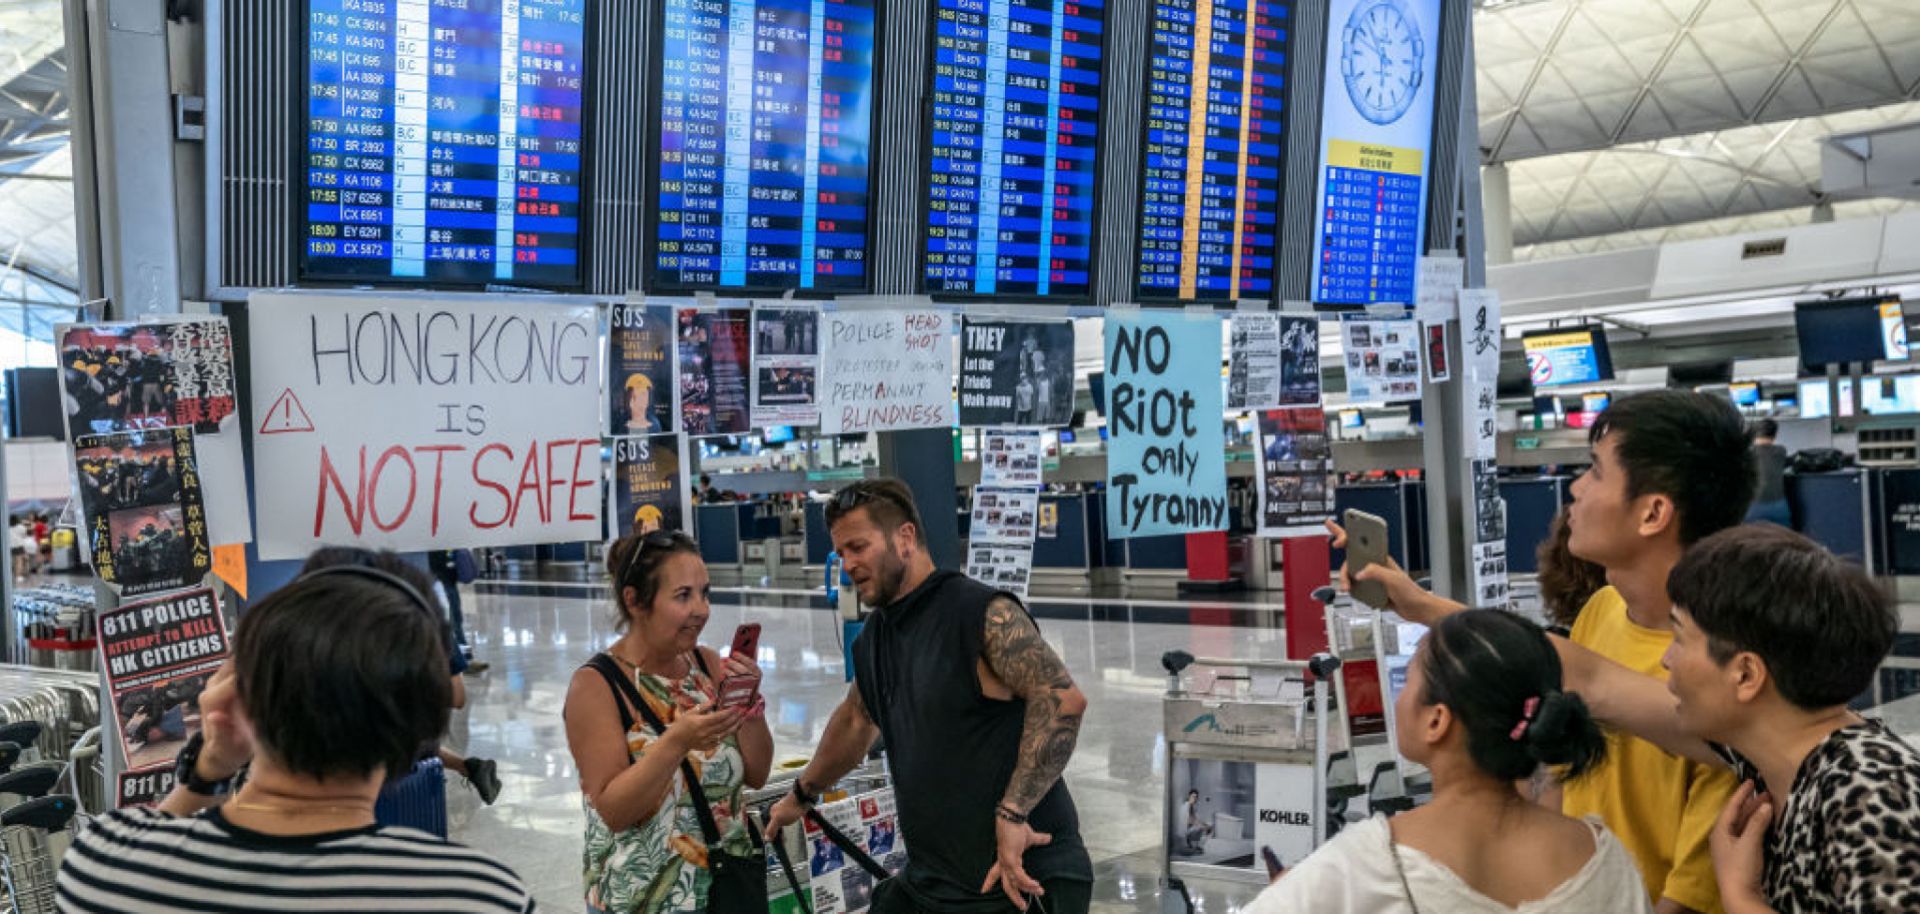 Tourists look at the information panel that shows all flights are canceled at Hong Kong International Airport during a demonstration on Aug. 12, 2019, in Hong Kong.